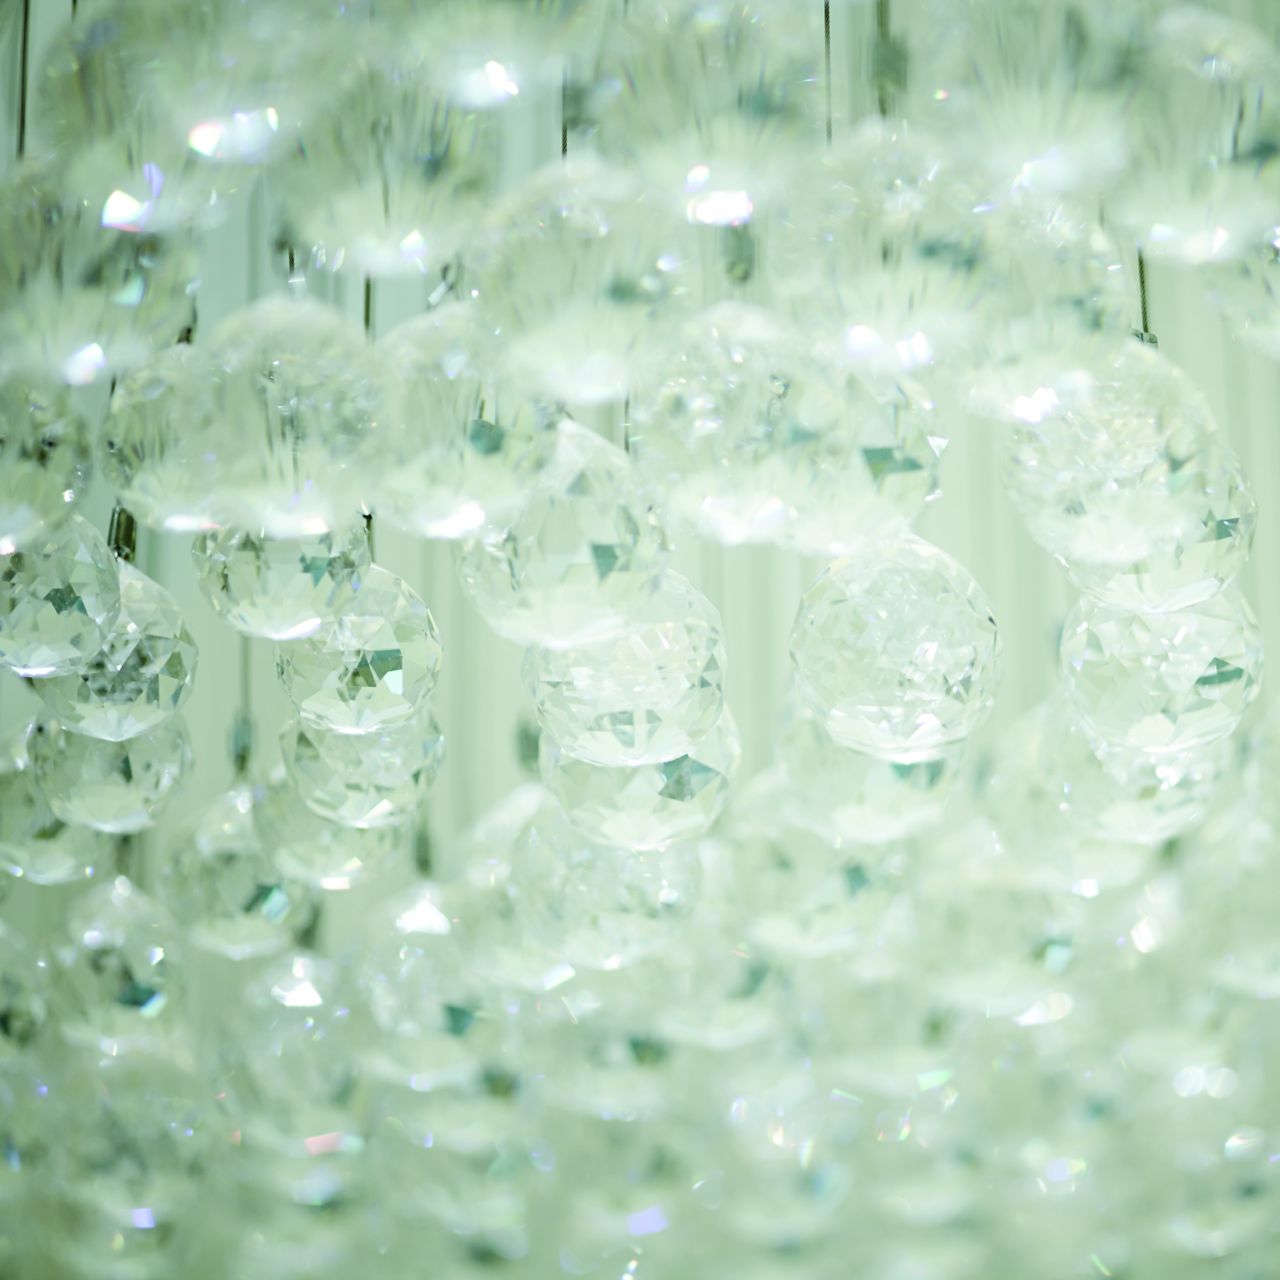 Close-up view of glass spheres bunched closely together with hues of white and sea green